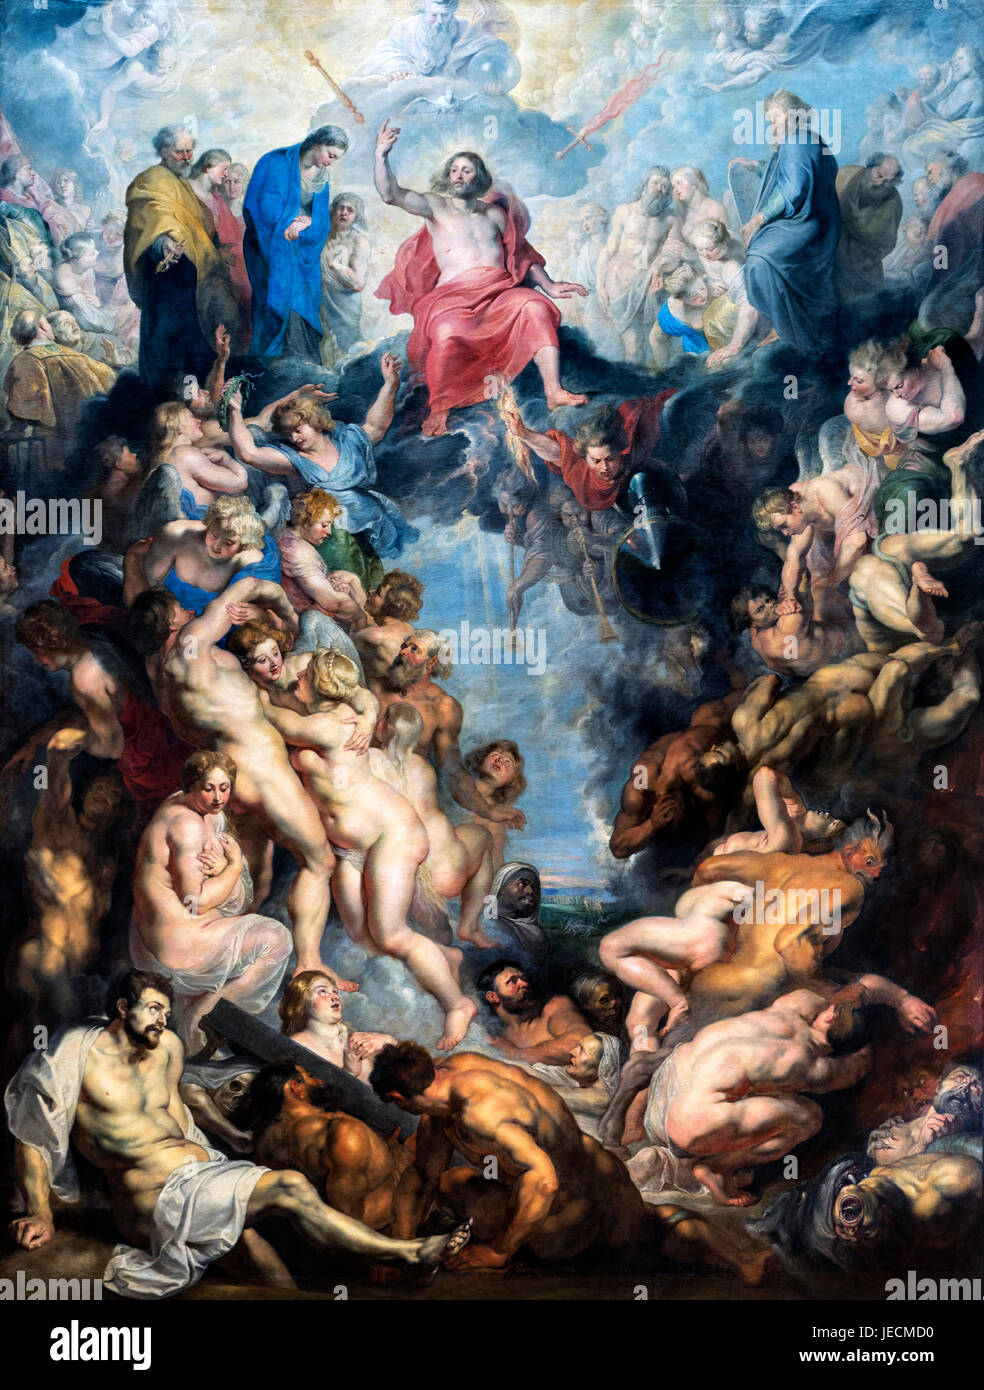 The Great Last Judgement by Peter Paul Rubens (1577-1640), oil on canvas, c.1617. Stock Photo